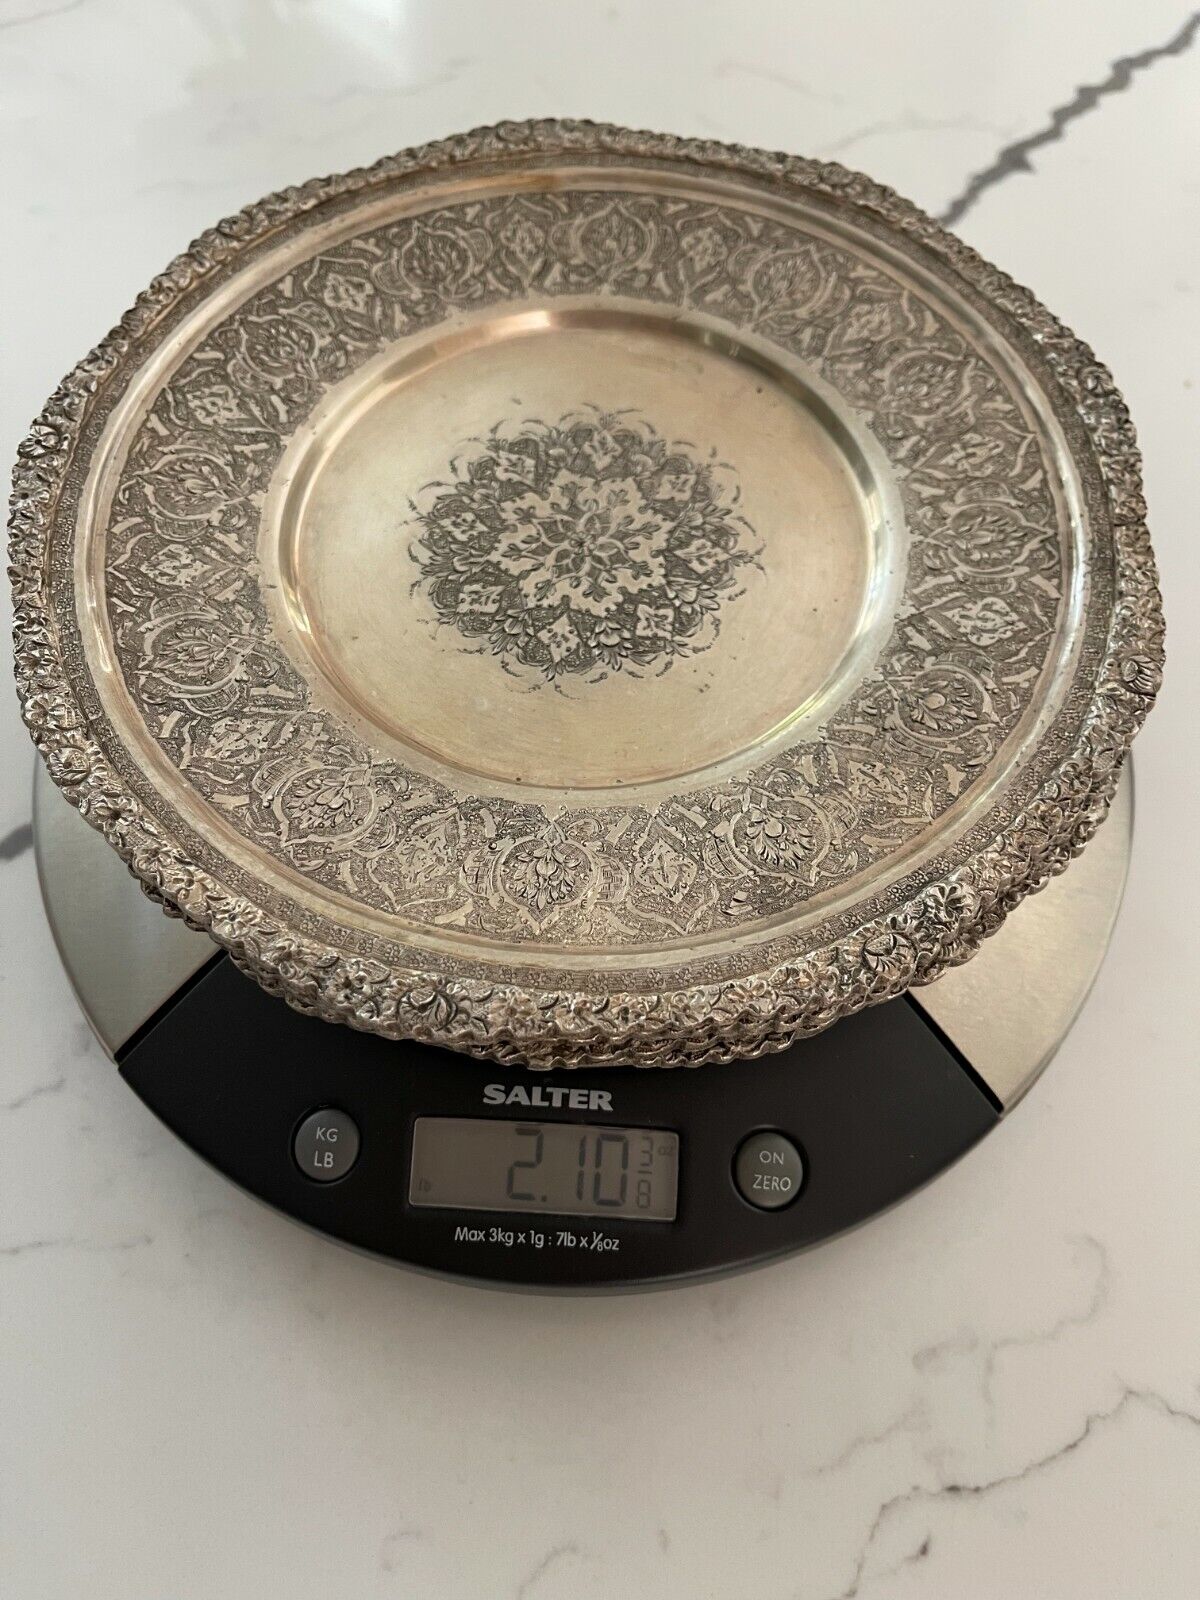 6 Plate Set AUTHENTIC Antique 84 Silver Persian Islamic middle eastern Art  Без бренда - фотография #8